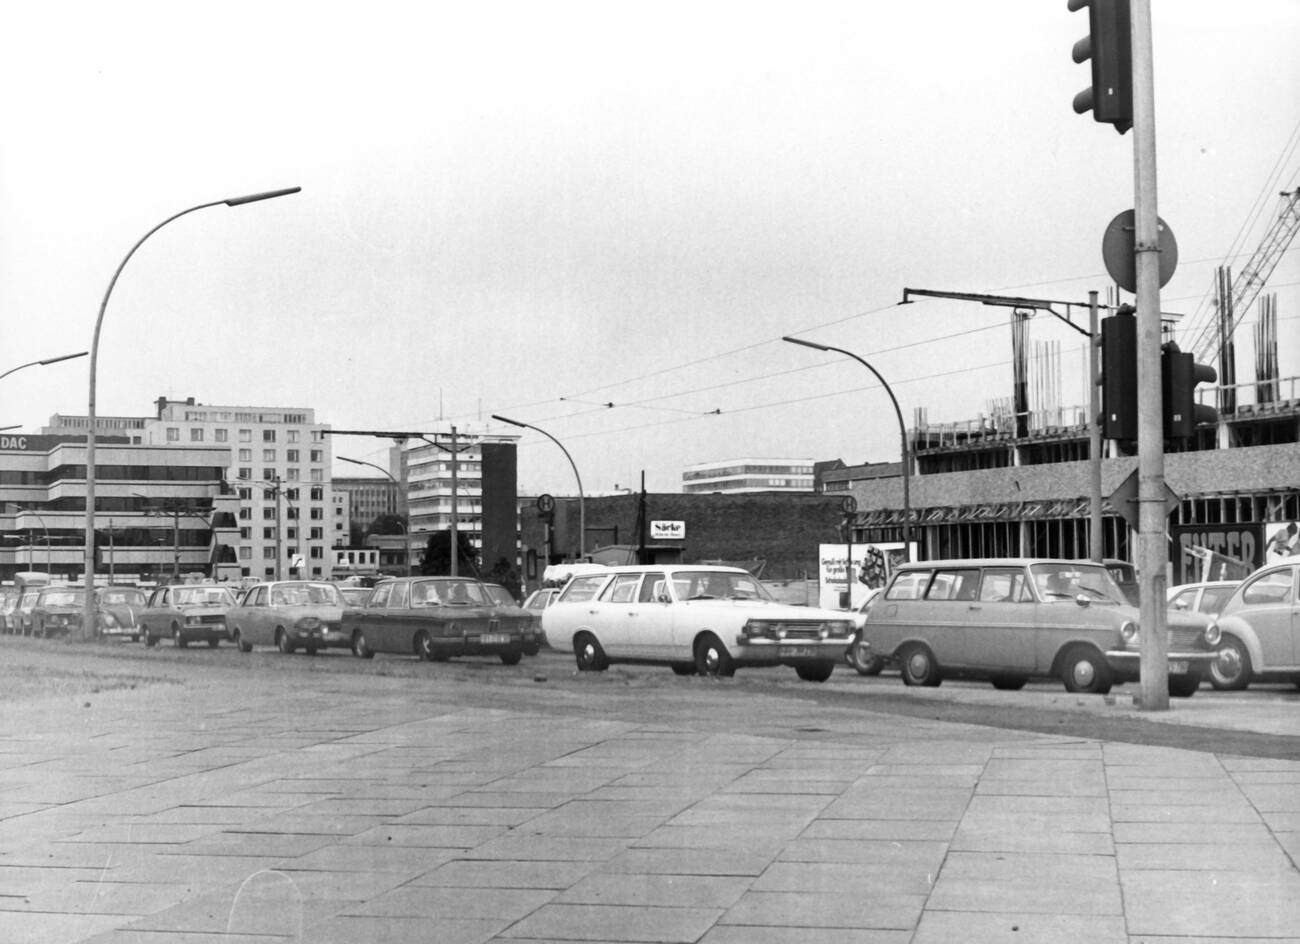 The exit to the bridges across the Elbe on a weekend in Hamburg, Germany in 1972.